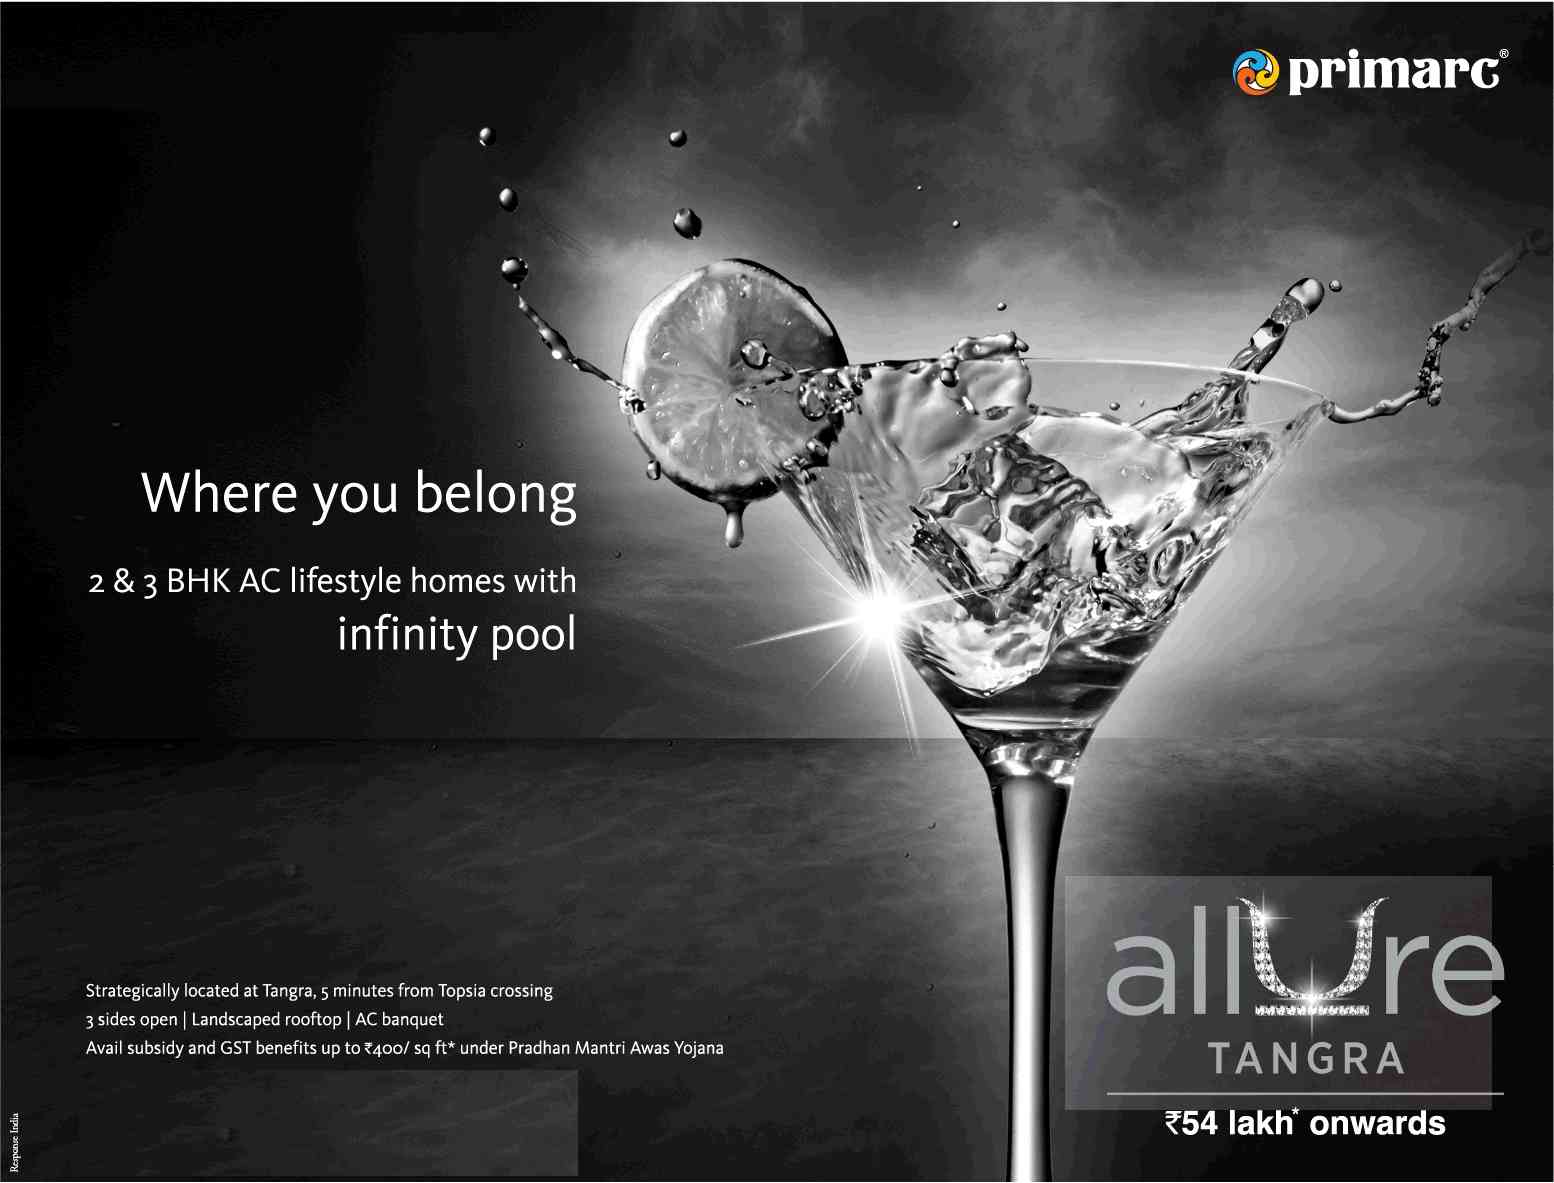 Book 2 & 3 BHK AC lifestyle homes starting at Rs. 54 Lakhs onwards at Primarc Allure in Kolkata